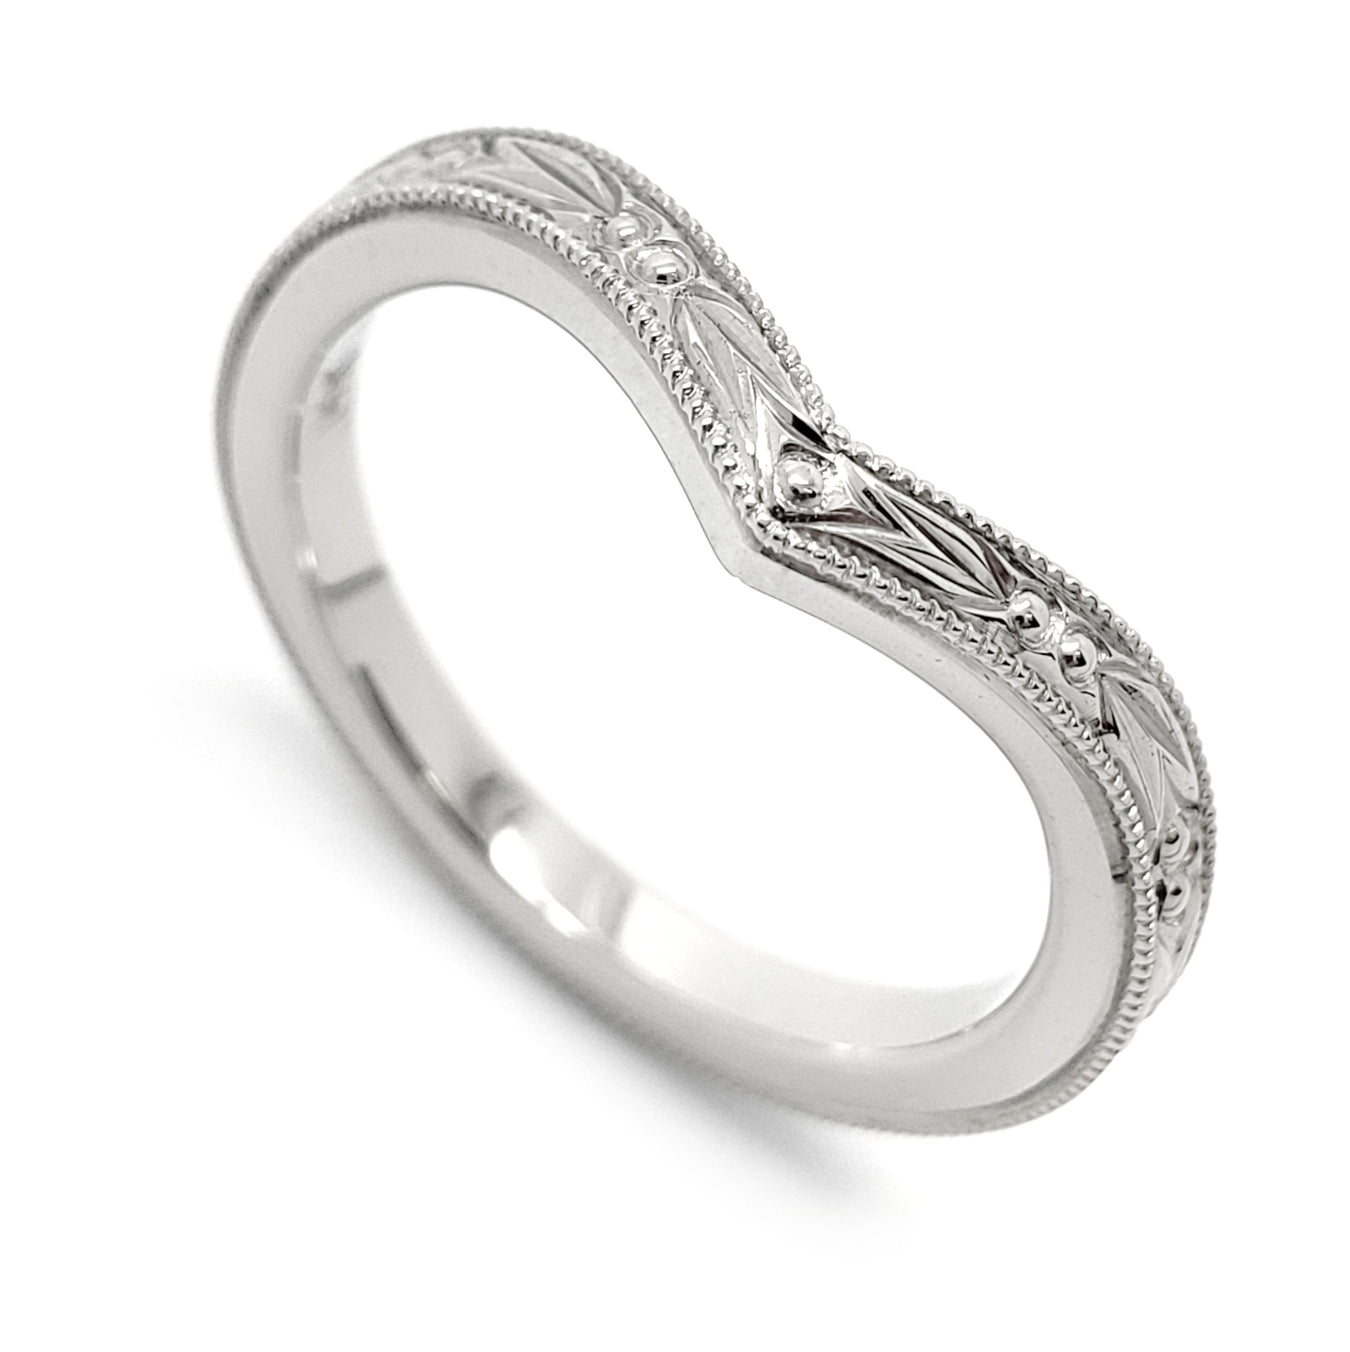 In Stock Hand Engraved Wedding Rings